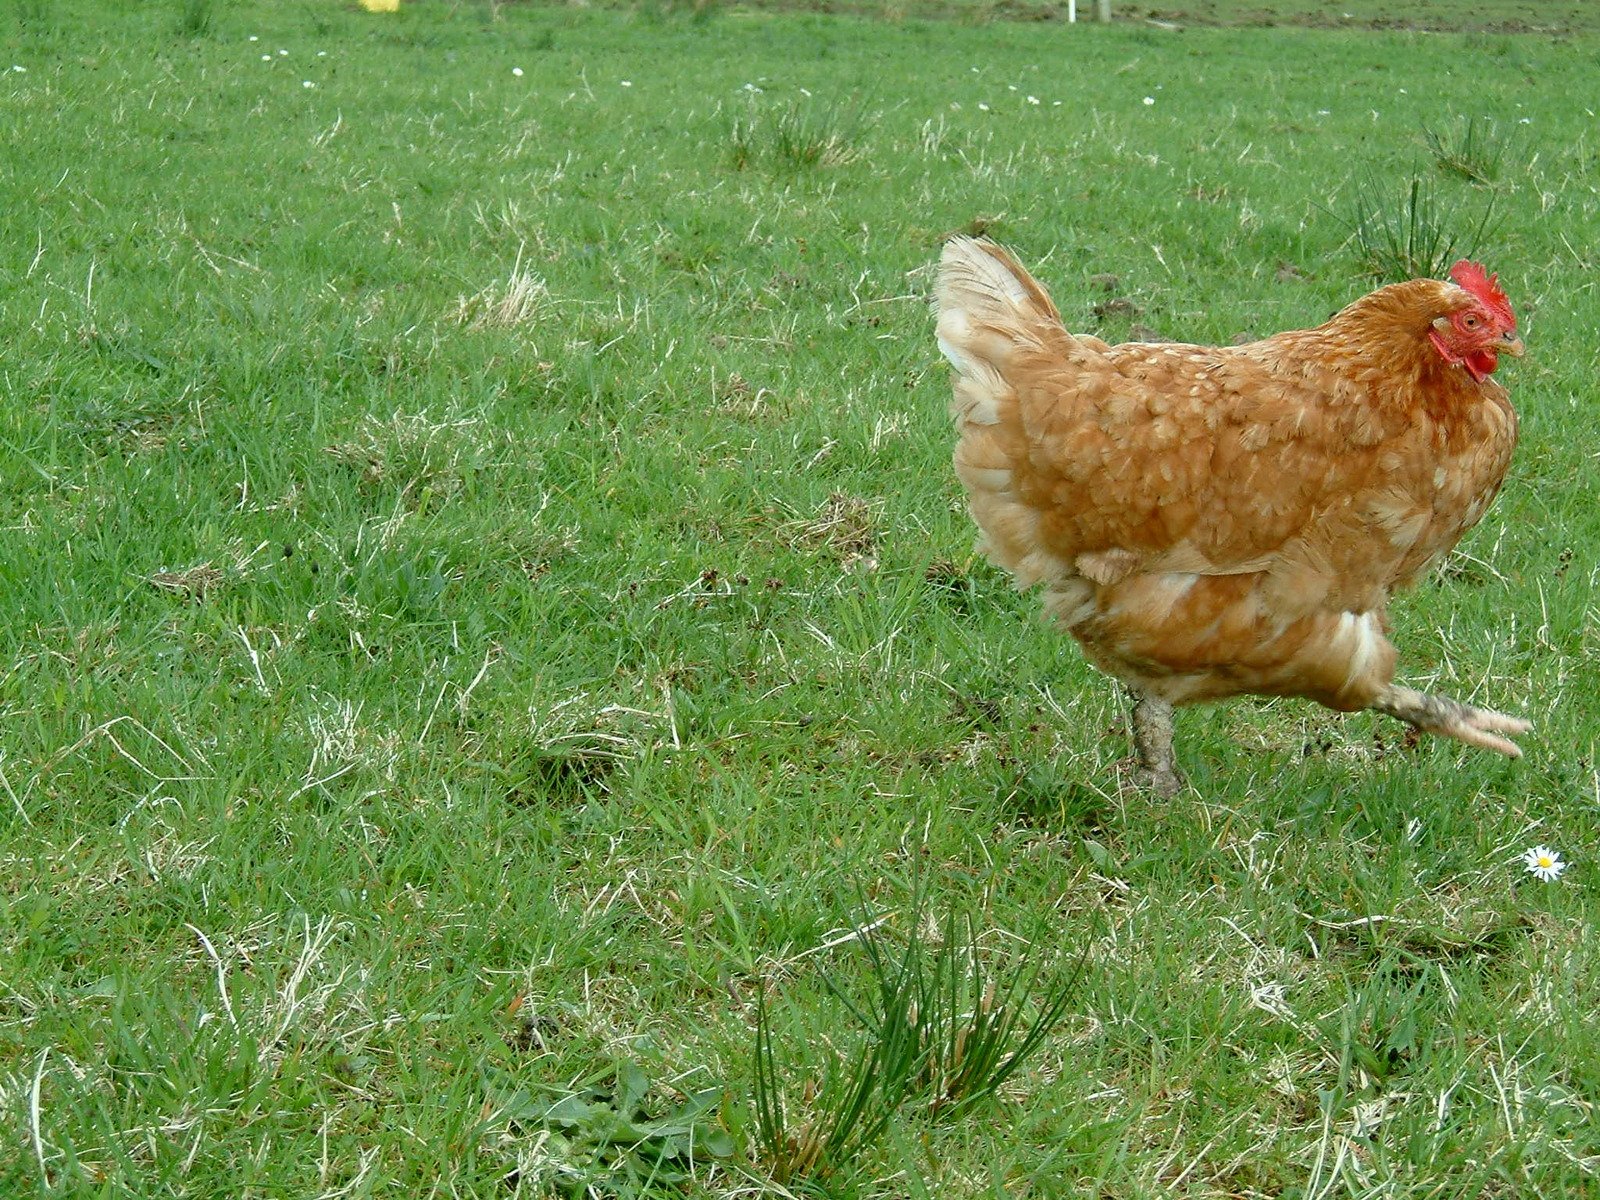 a chicken with red head and legs walks in a field